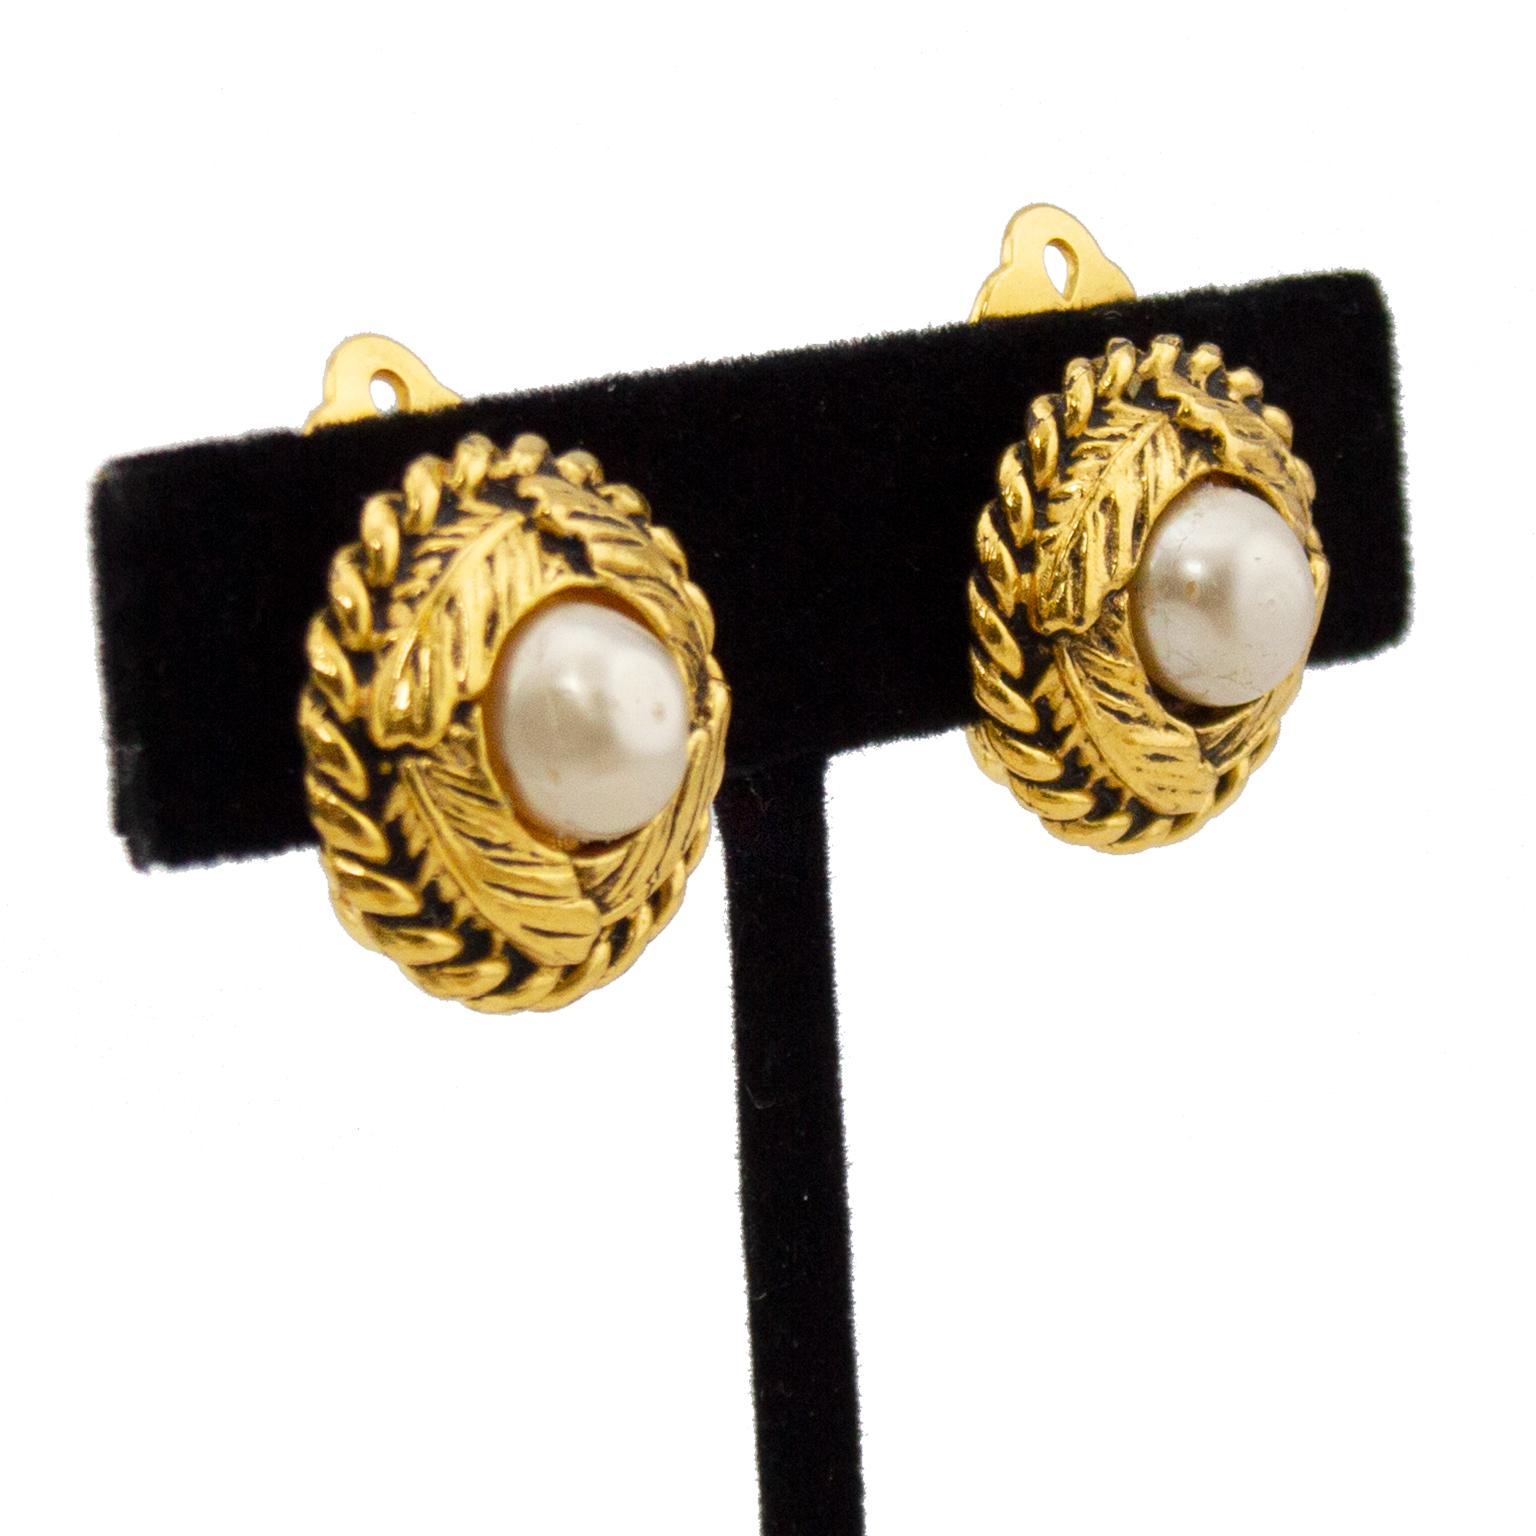 Classic and timeless gold tone metal Chanel clip on earrings. Twisted trim with banana leaves wrapped around a single pearl in the centre. Chanel logo plaque on back - this design pre-dates the year being stamped on the plaque. Excellent vintage